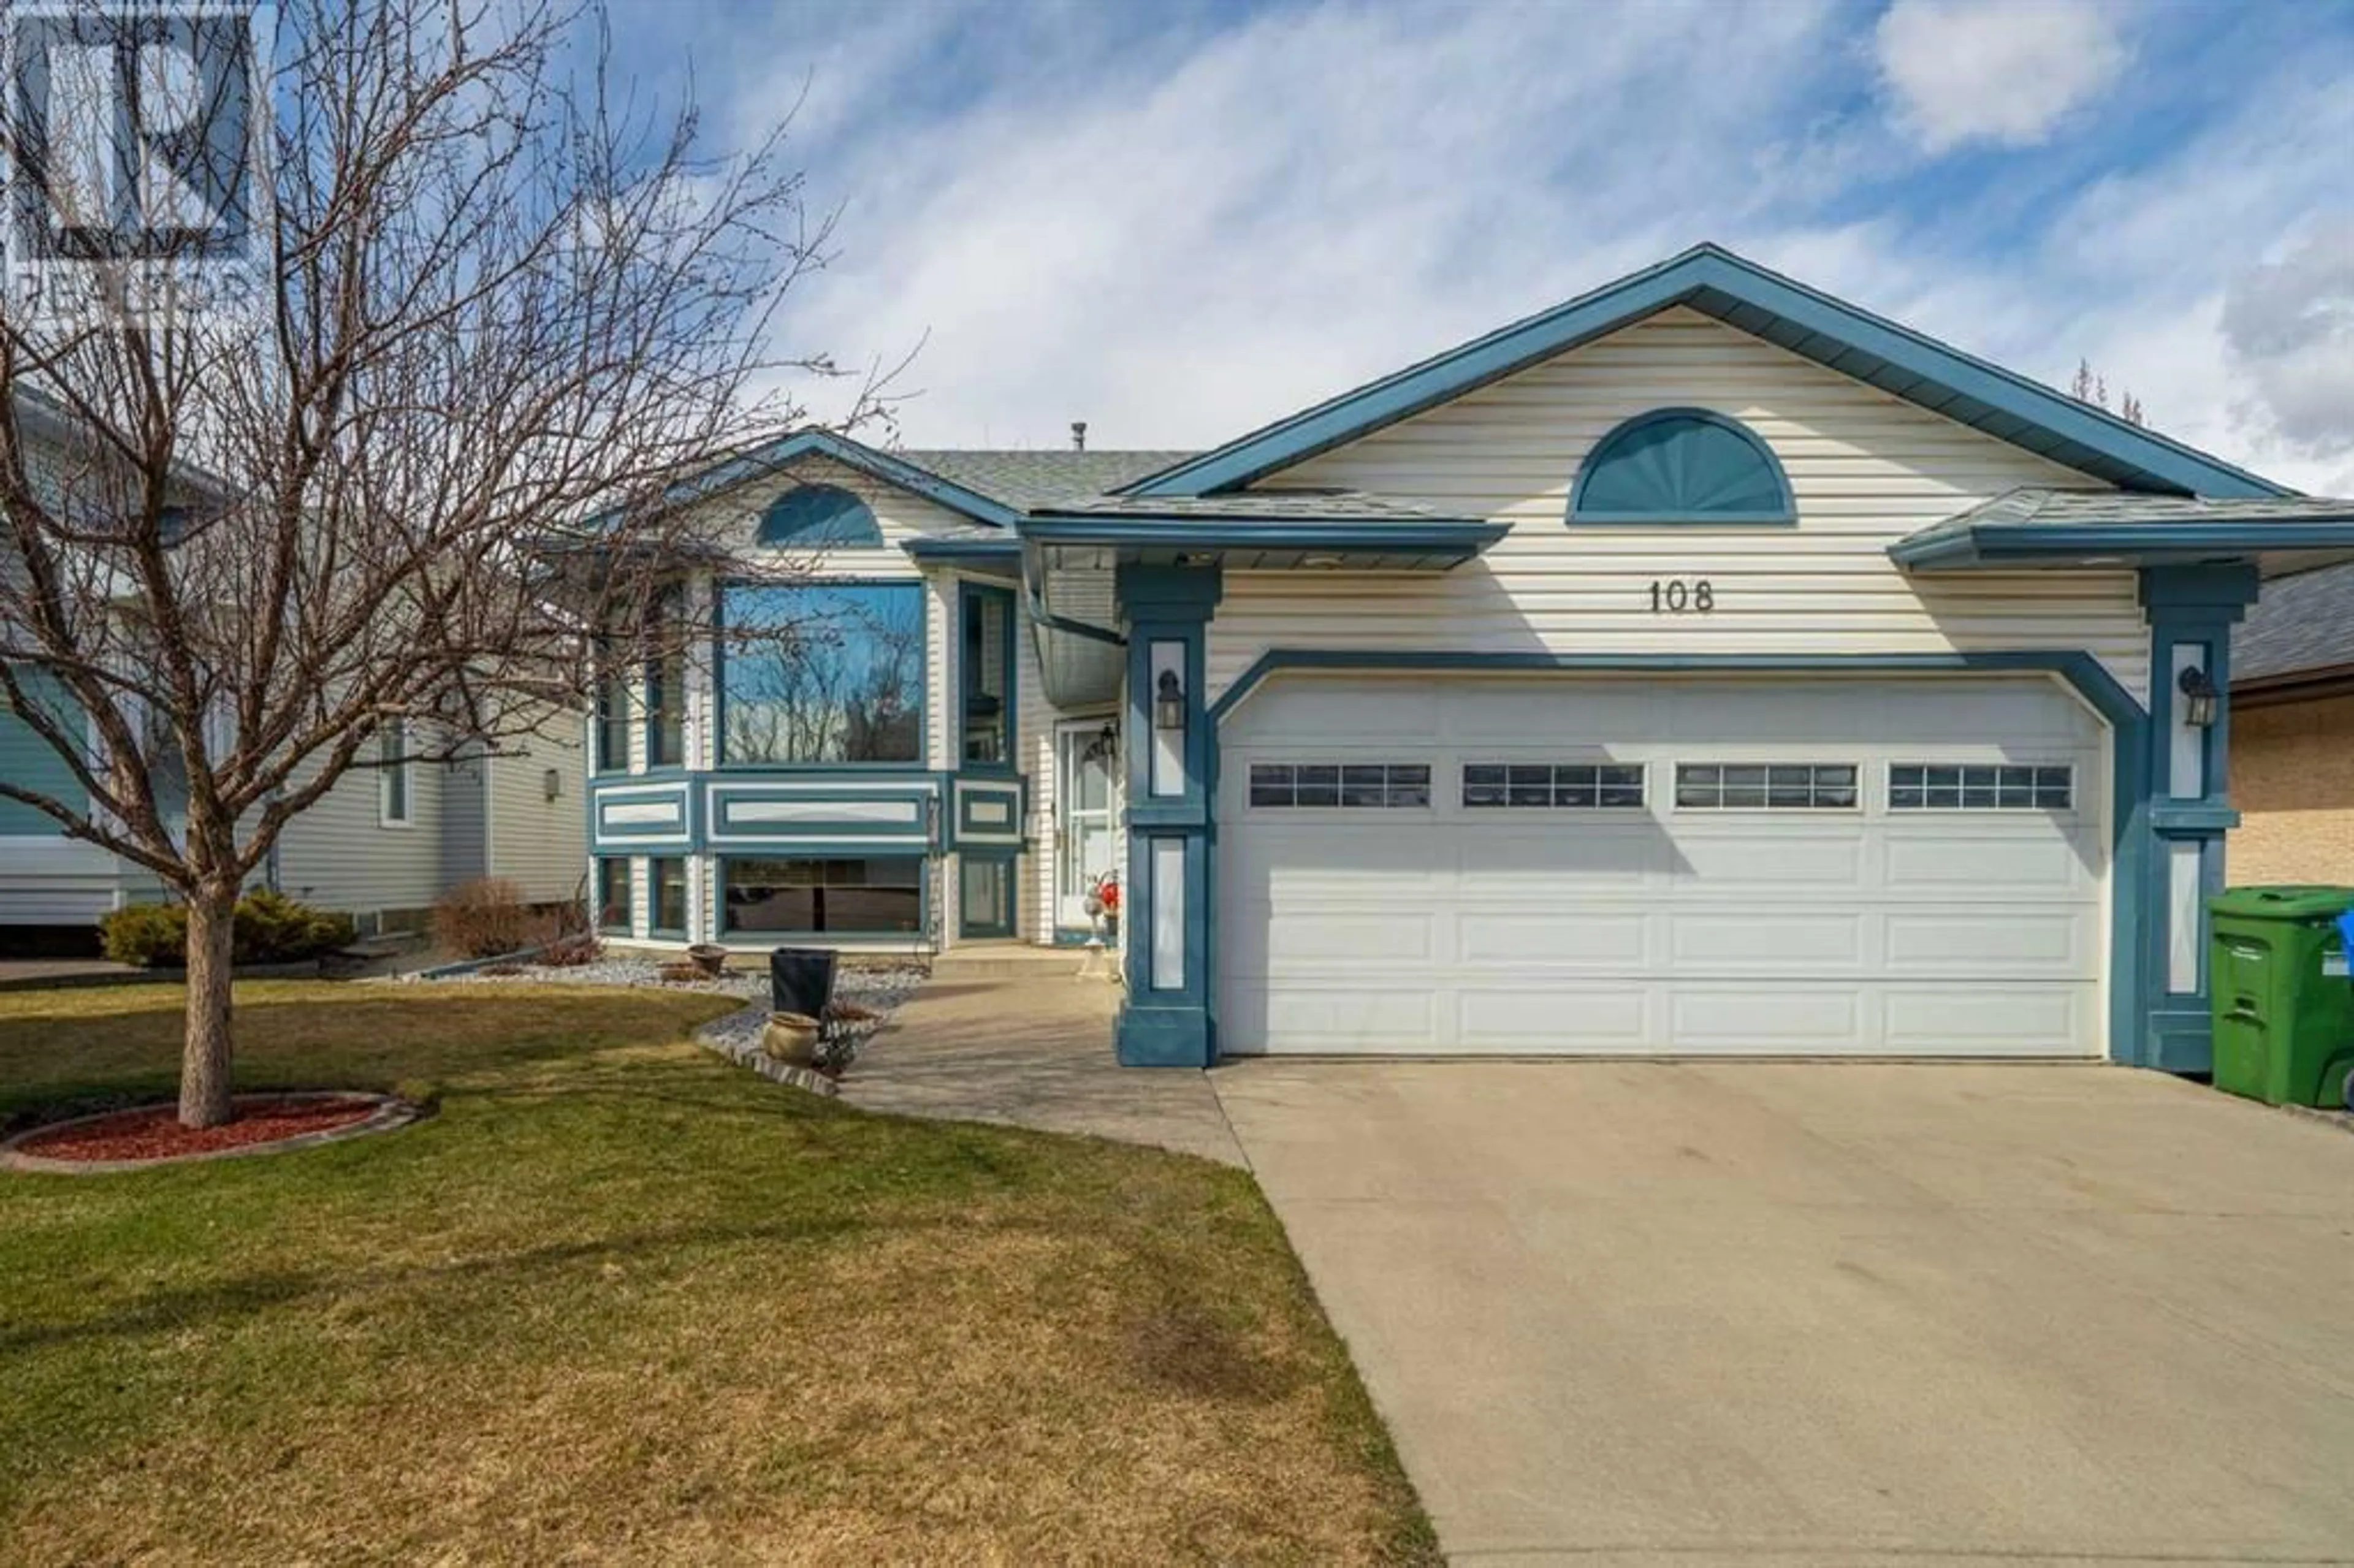 Frontside or backside of a home for 108 Hidden Vale Crescent NW, Calgary Alberta T3A5B6